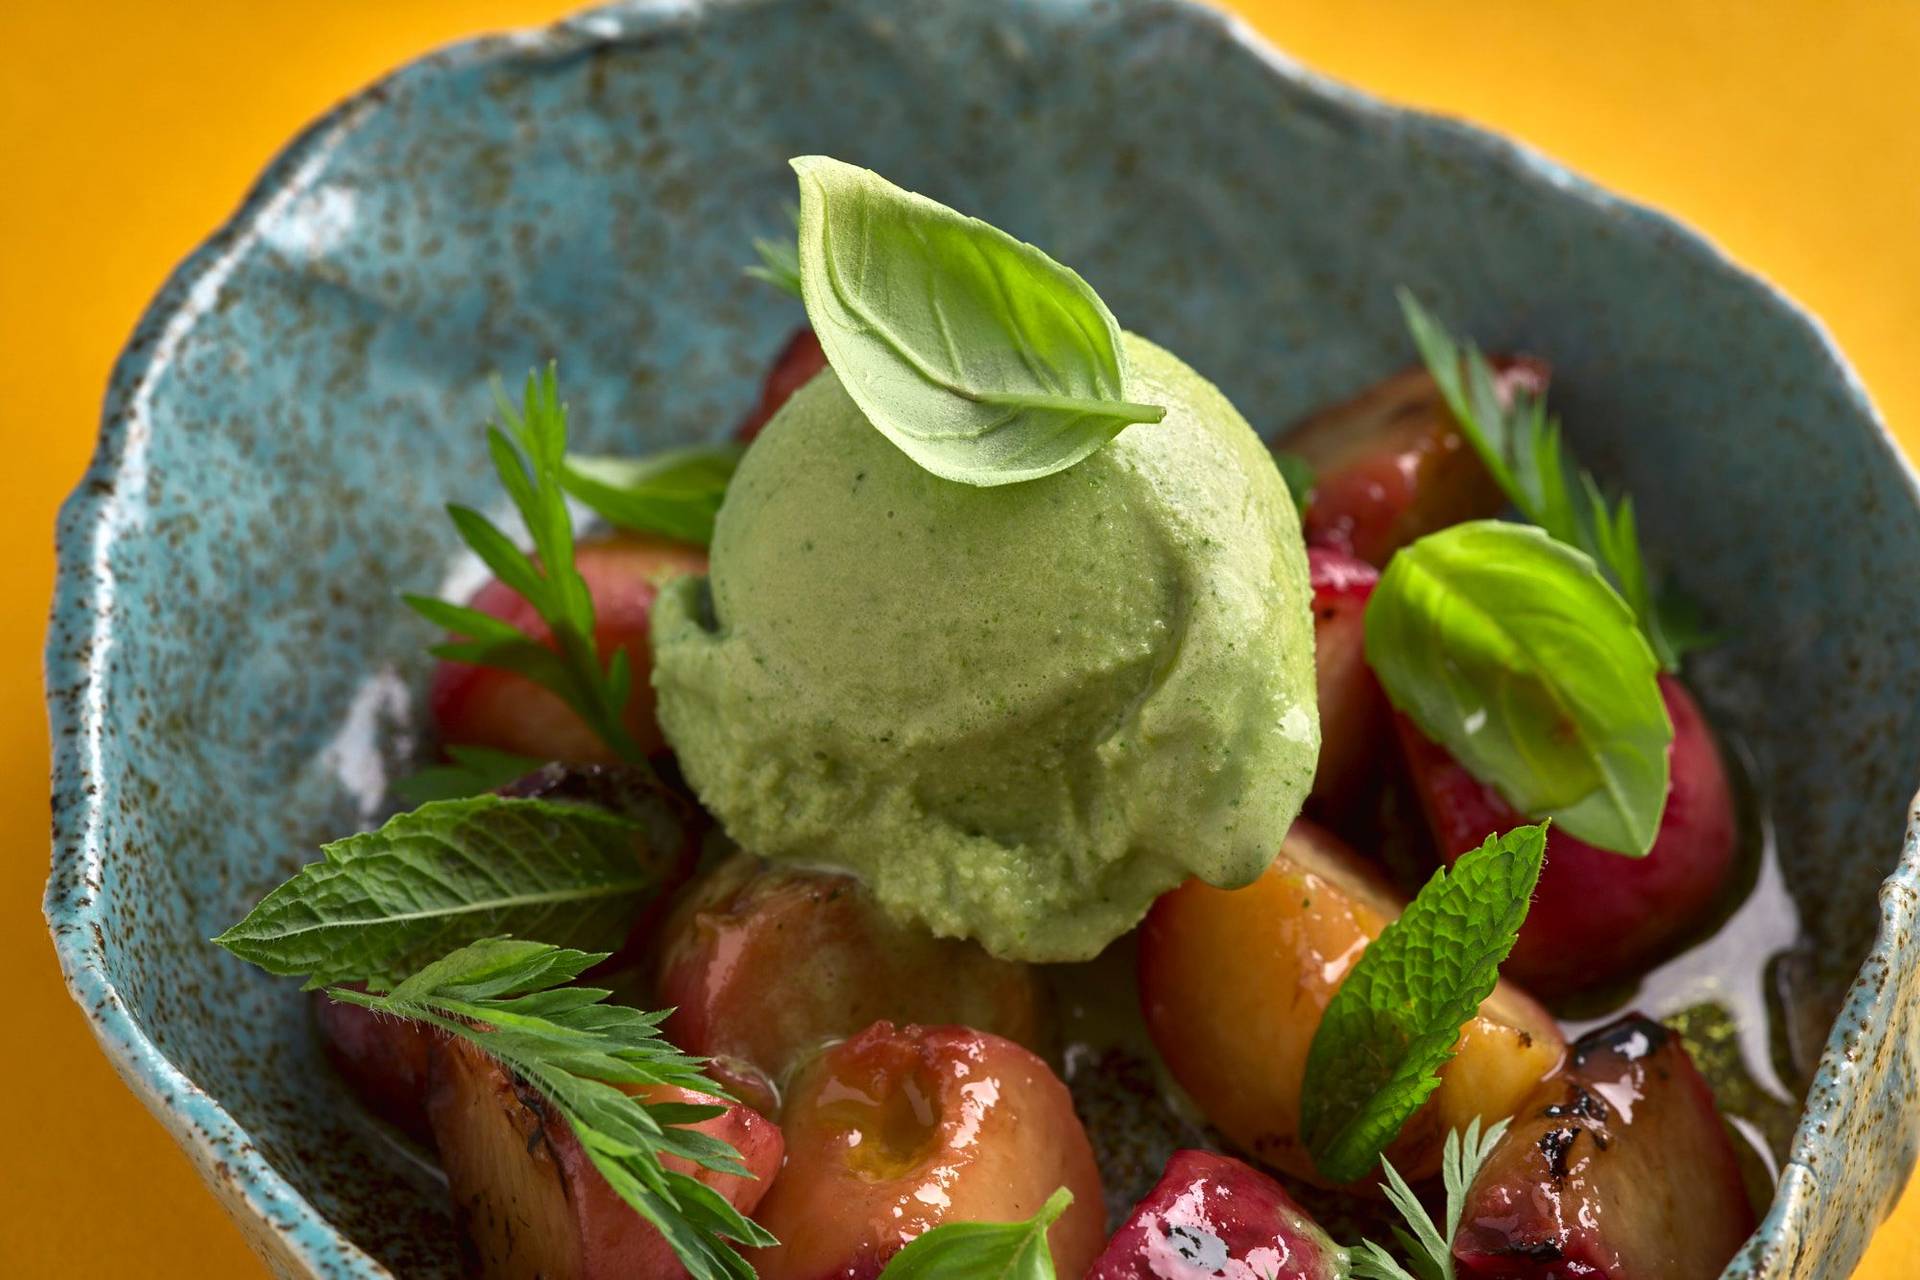 herbs and yogurt ice cream with grilled peaches and greek olive oil in a turquoise ceramic bowl with yellow background